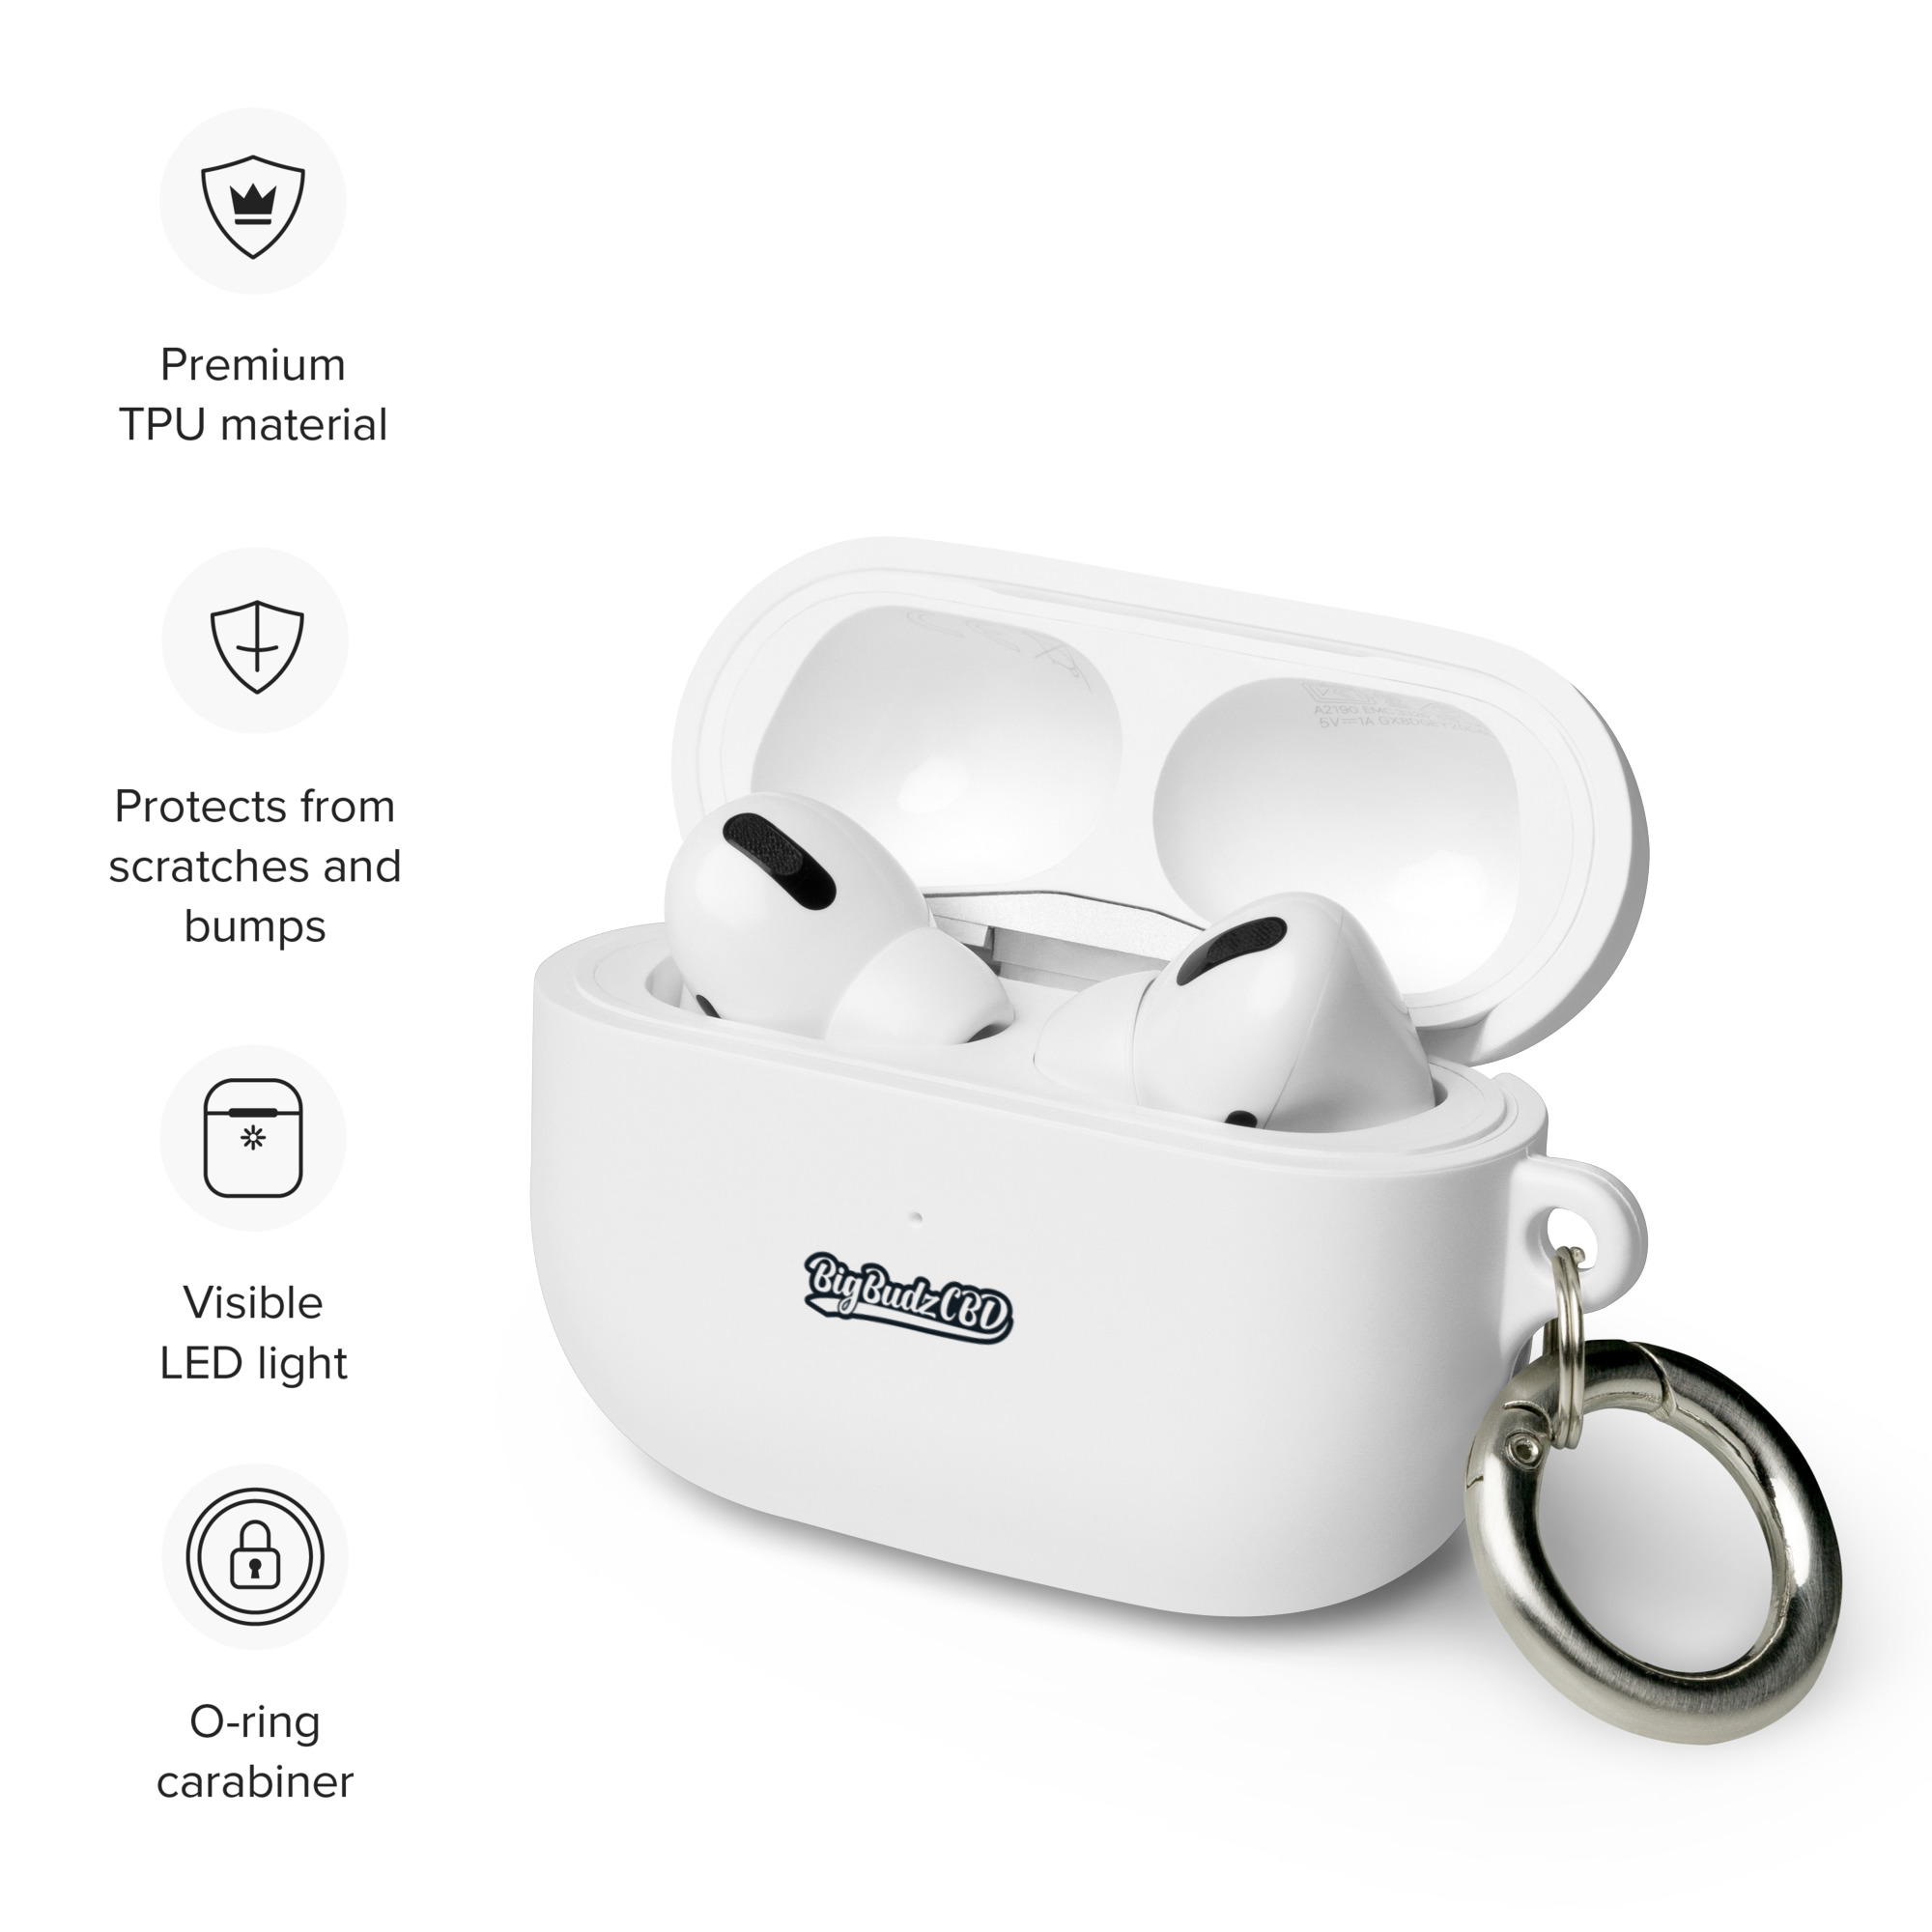 rubber-case-for-airpods-white-airpods-pro-front-659c84887b110.jpg